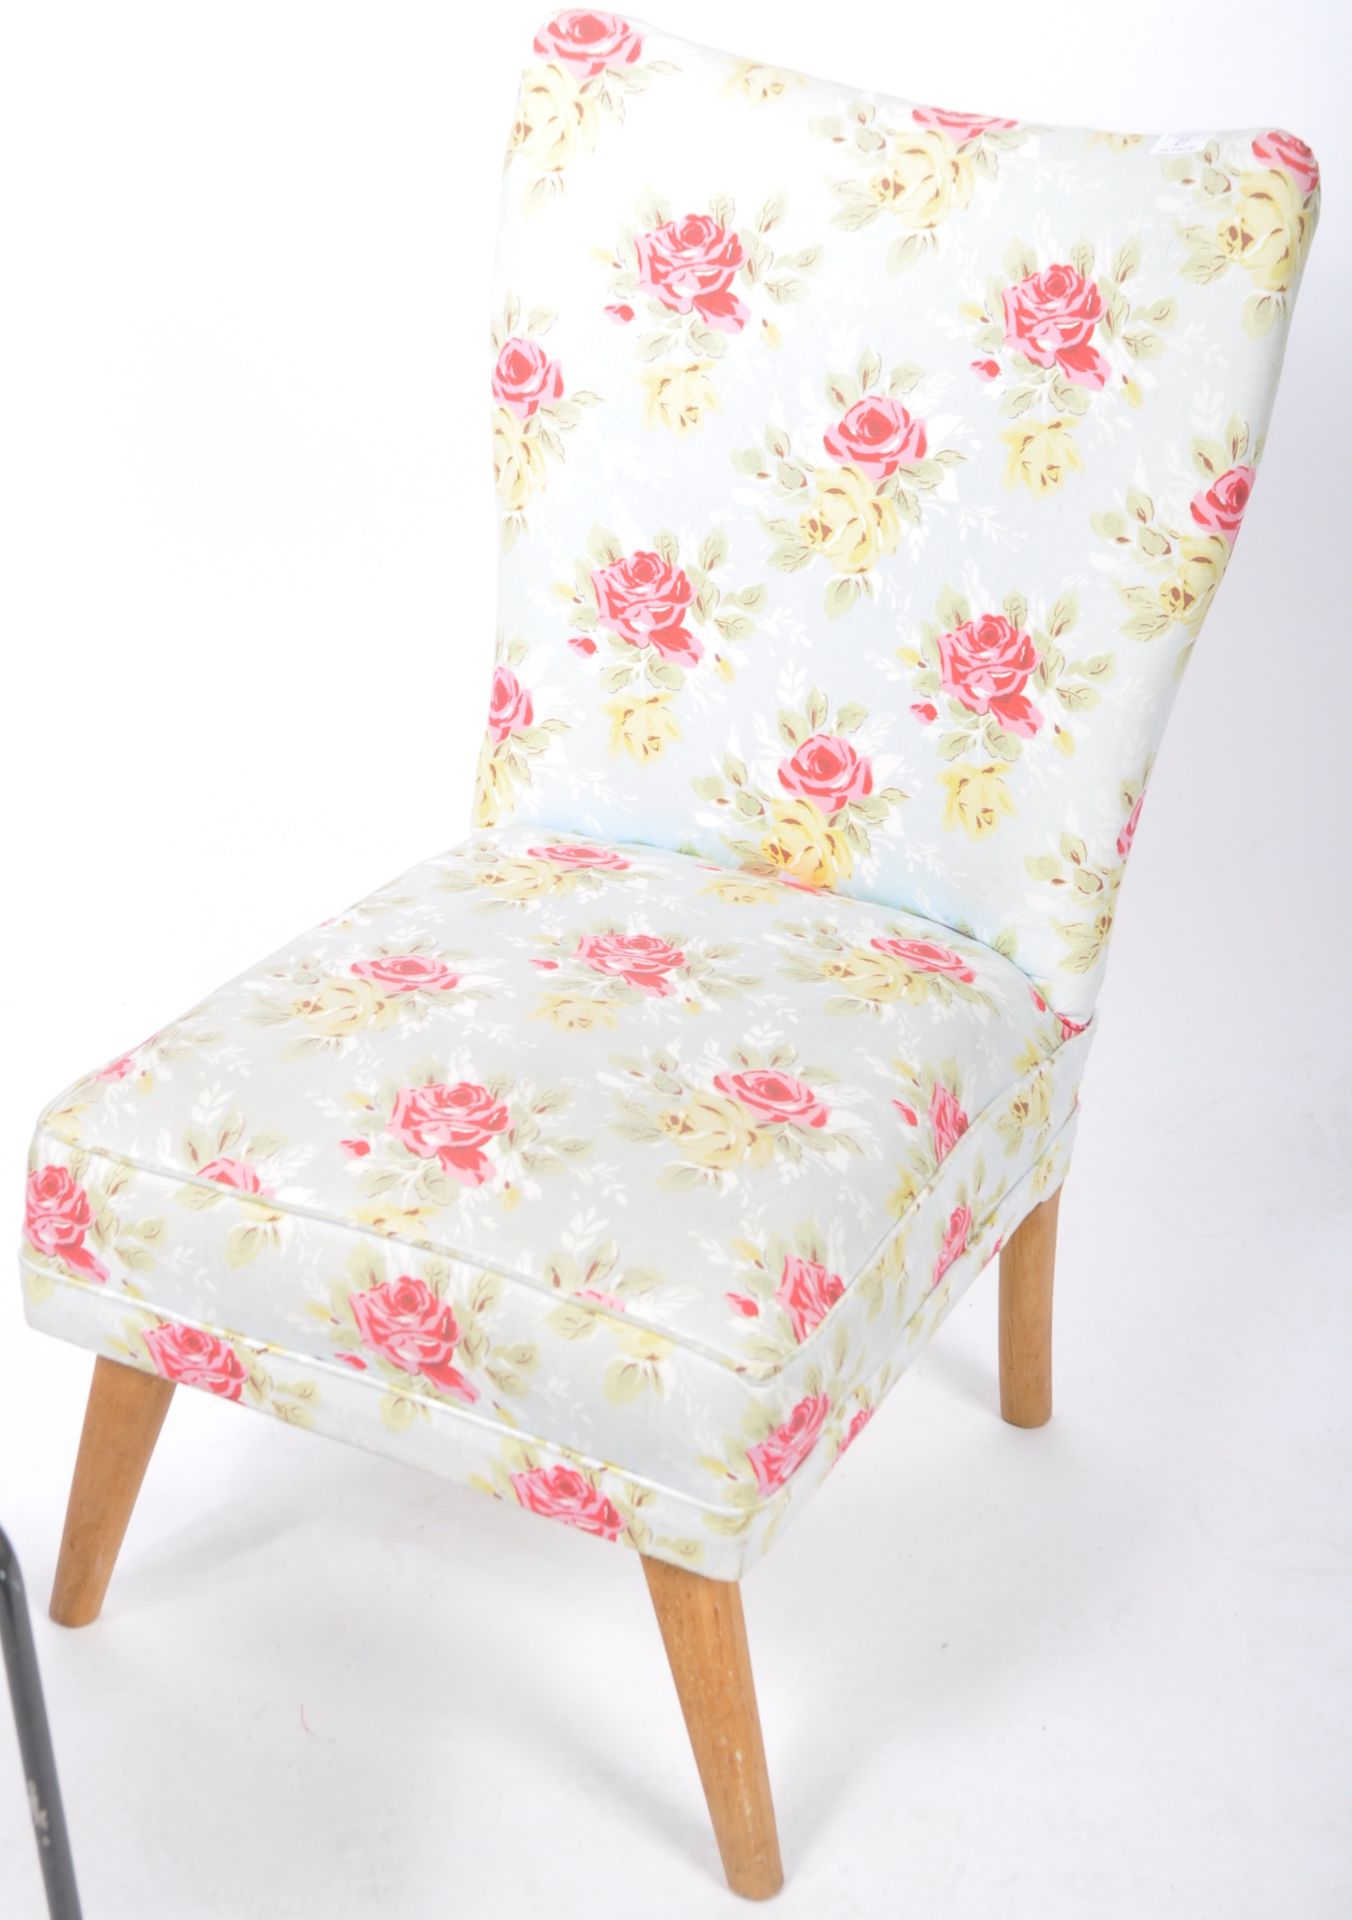 RETRO HOWARD KEITH MANNER LOW COCKTAIL CHAIR IN CATH KIDSTON UPHOLSTERY